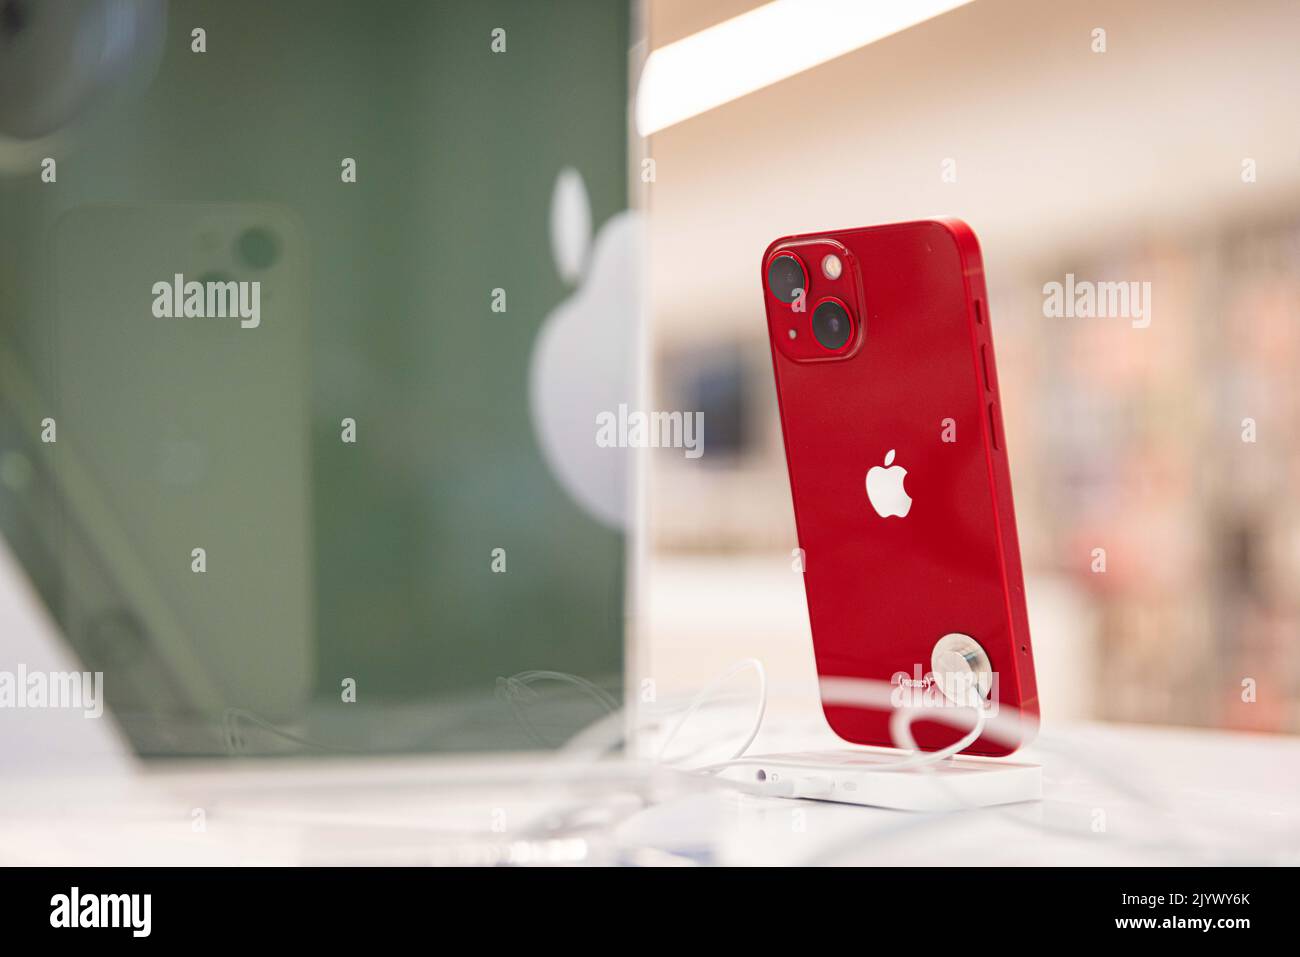 https://c8.alamy.com/comp/2JYWY6K/bratislava-slovakia-8th-sep-2022-apples-iphone-13-mini-seen-on-display-inside-an-electronics-store-in-bratislava-apple-has-announced-during-their-presentation-of-the-new-iphone-14-that-the-new-iphone-model-wont-be-more-expensive-than-their-previous-model-and-iphone-11-and-12-models-wont-be-sold-anymore-credit-image-stanislav-kogikusopa-images-via-zuma-press-wire-2JYWY6K.jpg